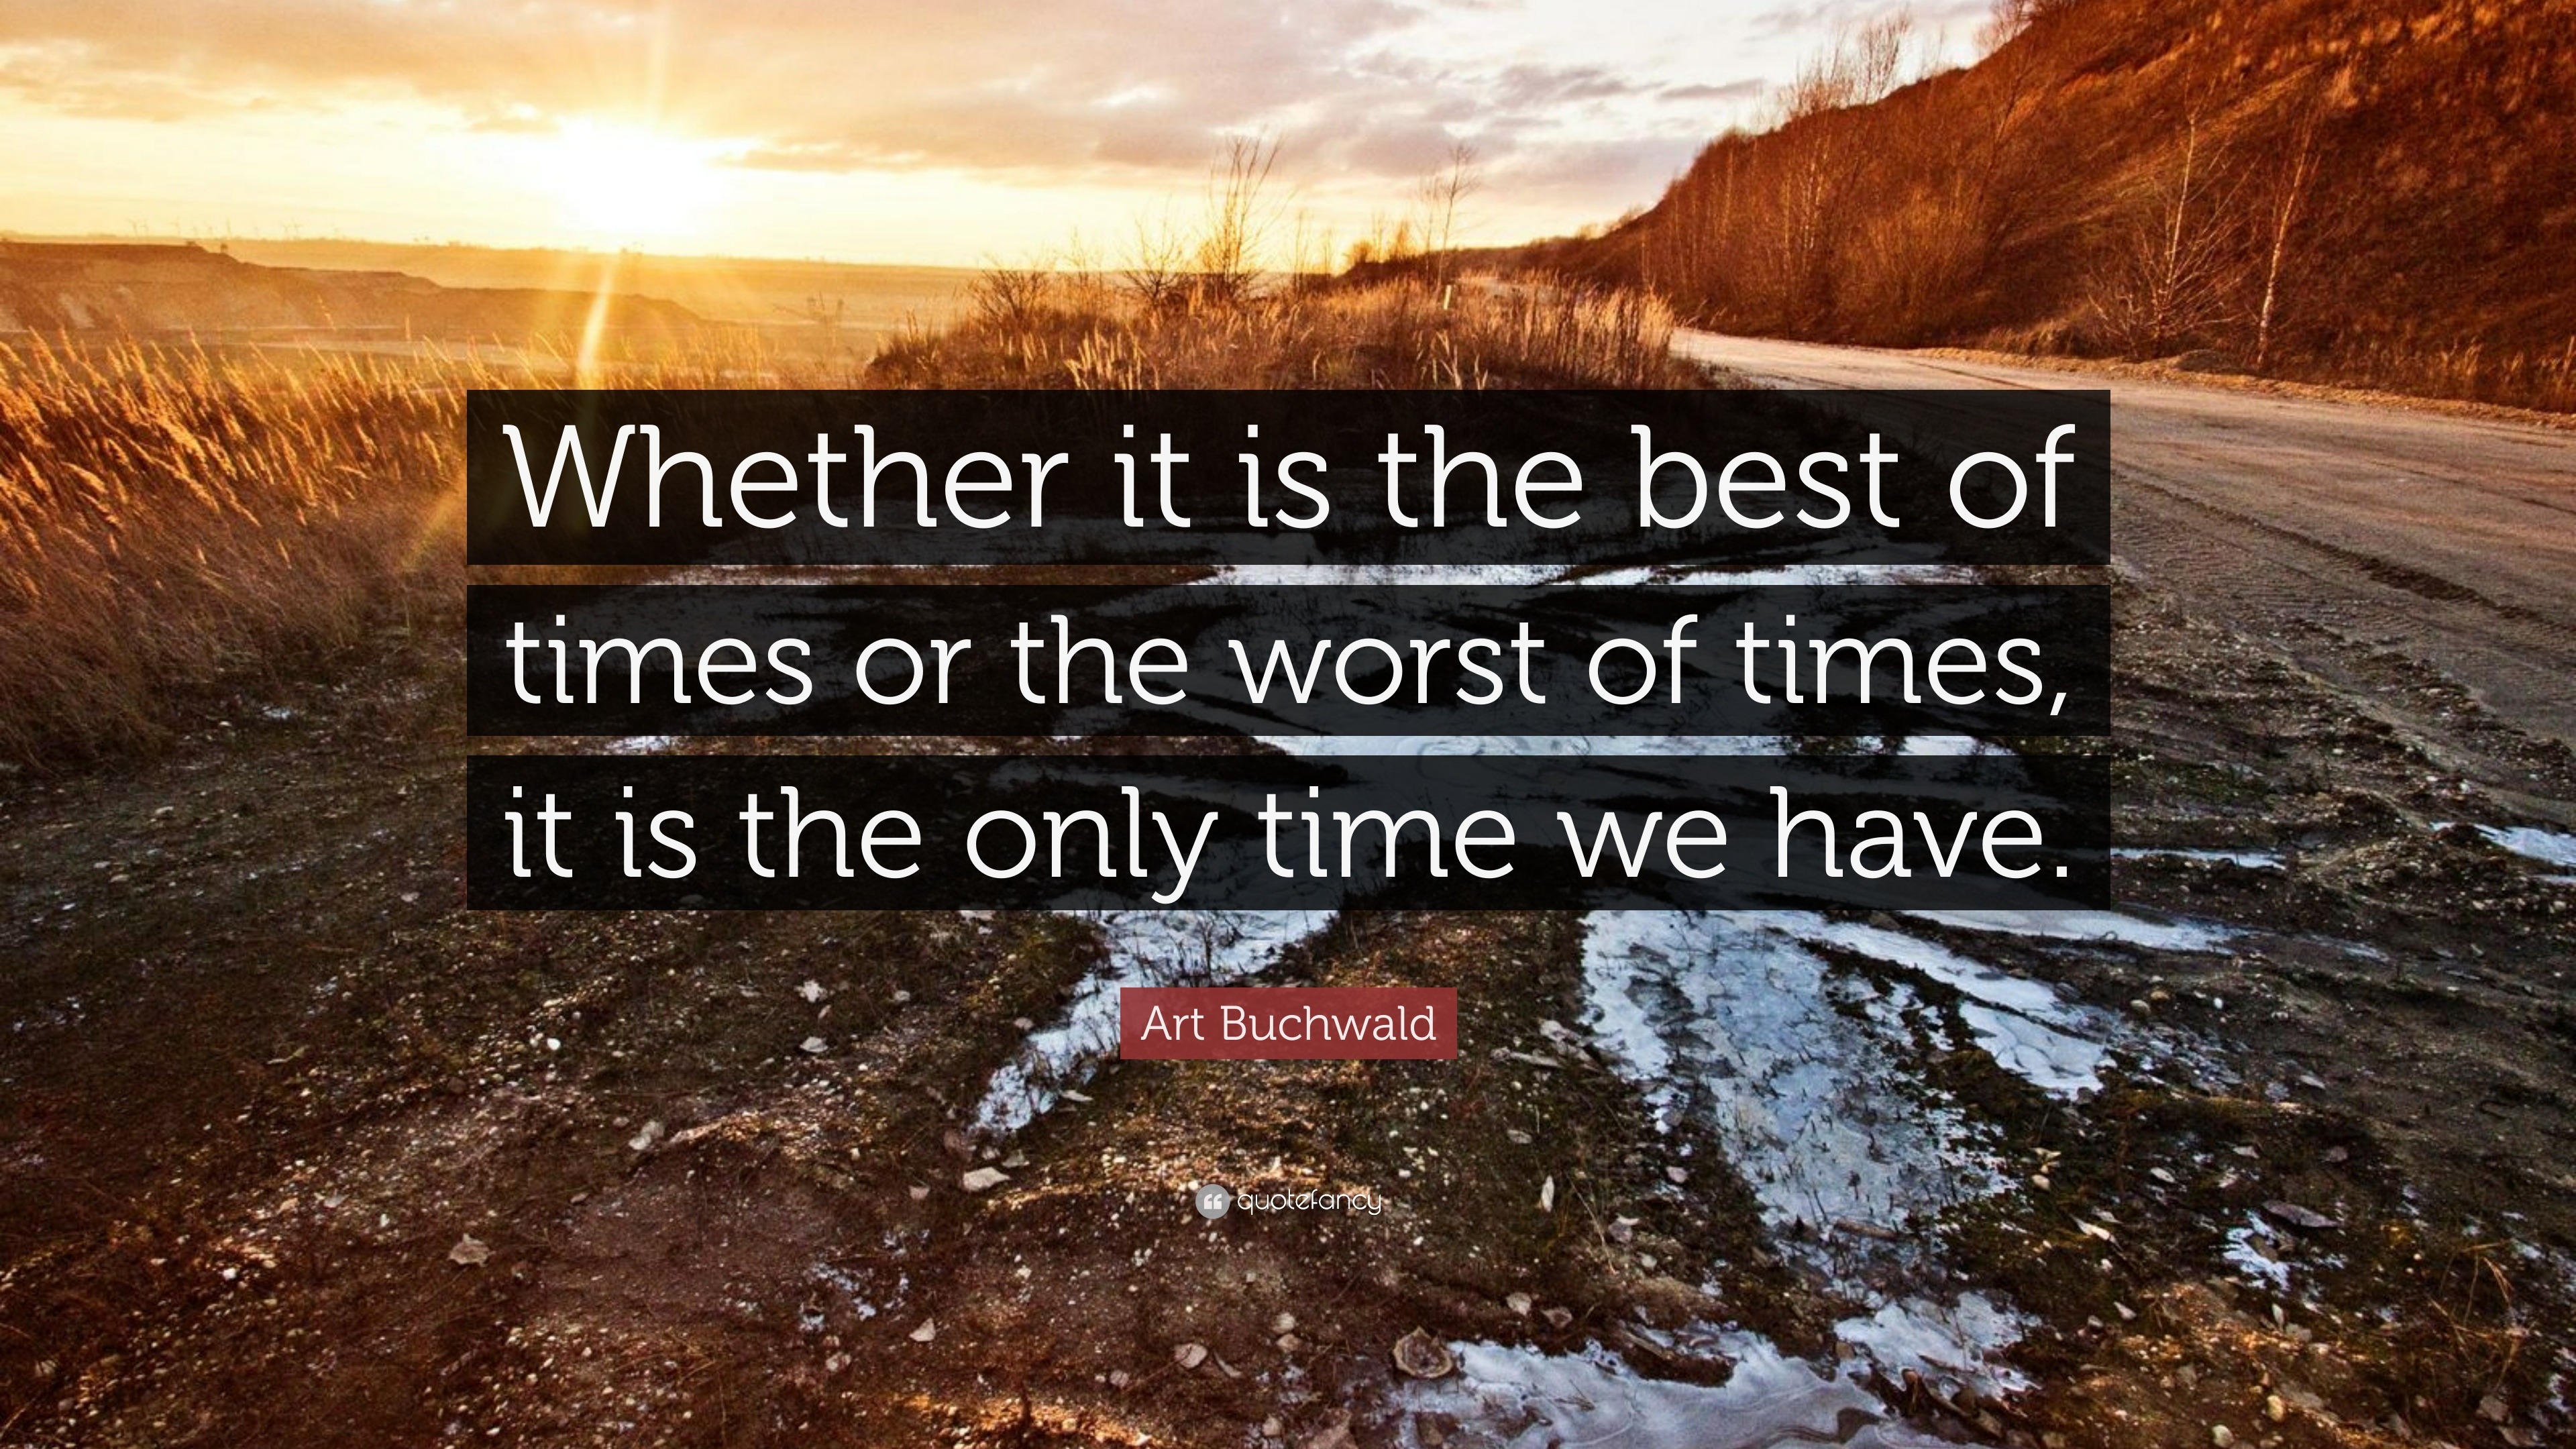 Art Buchwald Quote: “Whether it is the best of times or the worst of